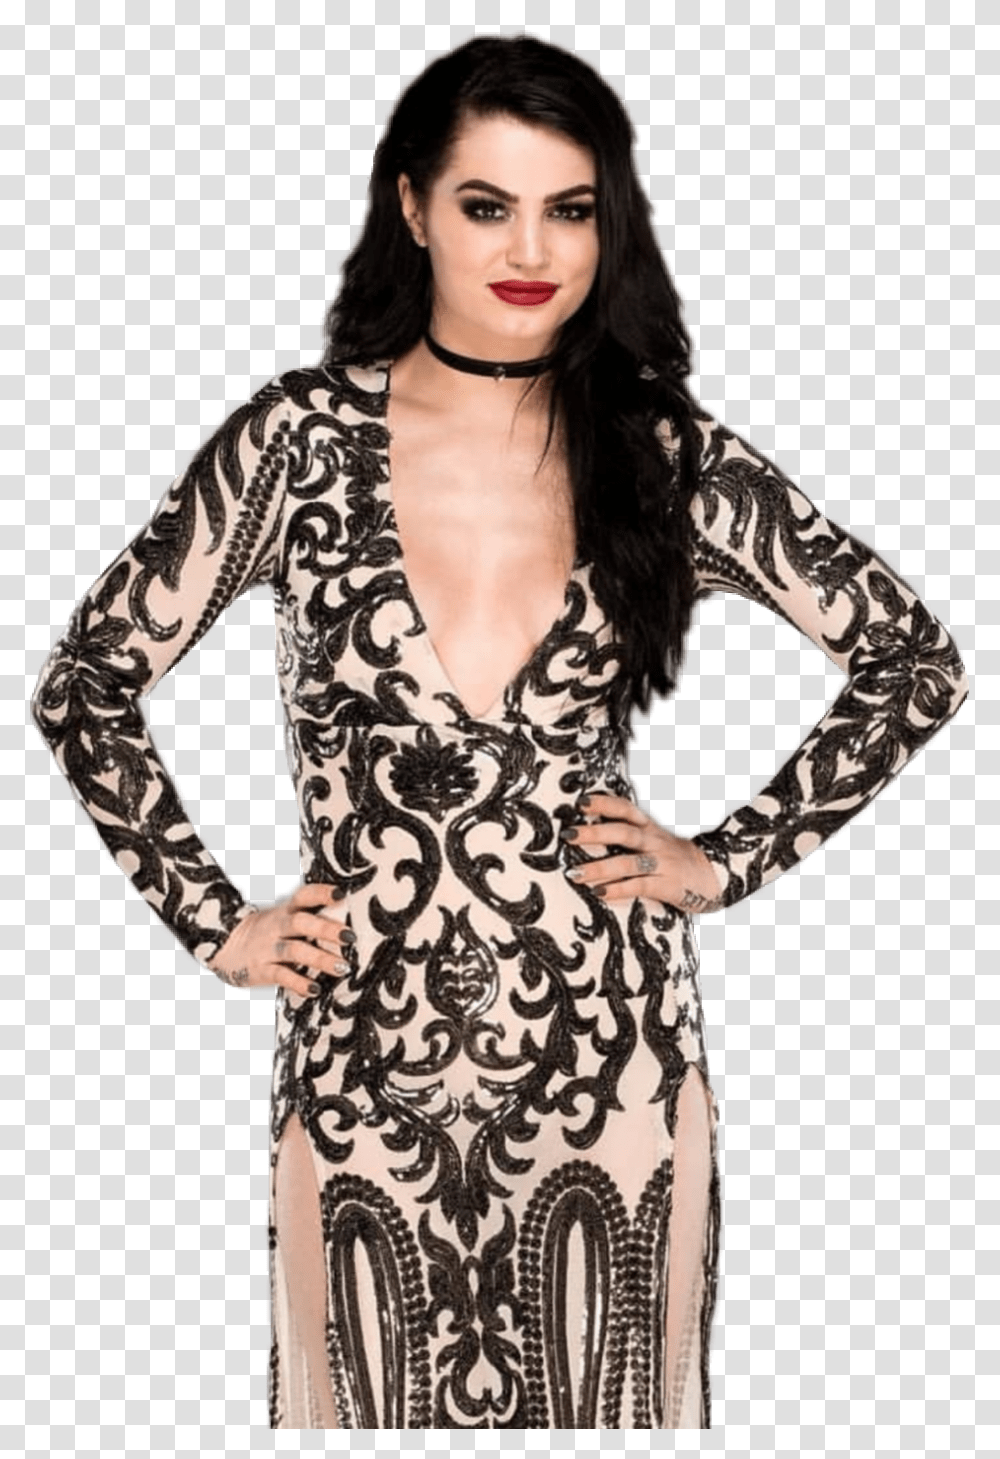 Clipart Download Wwediva Realpaigewwe Raw Wwe Hall Of Fame Fashion 2019, Dress, Female, Person Transparent Png